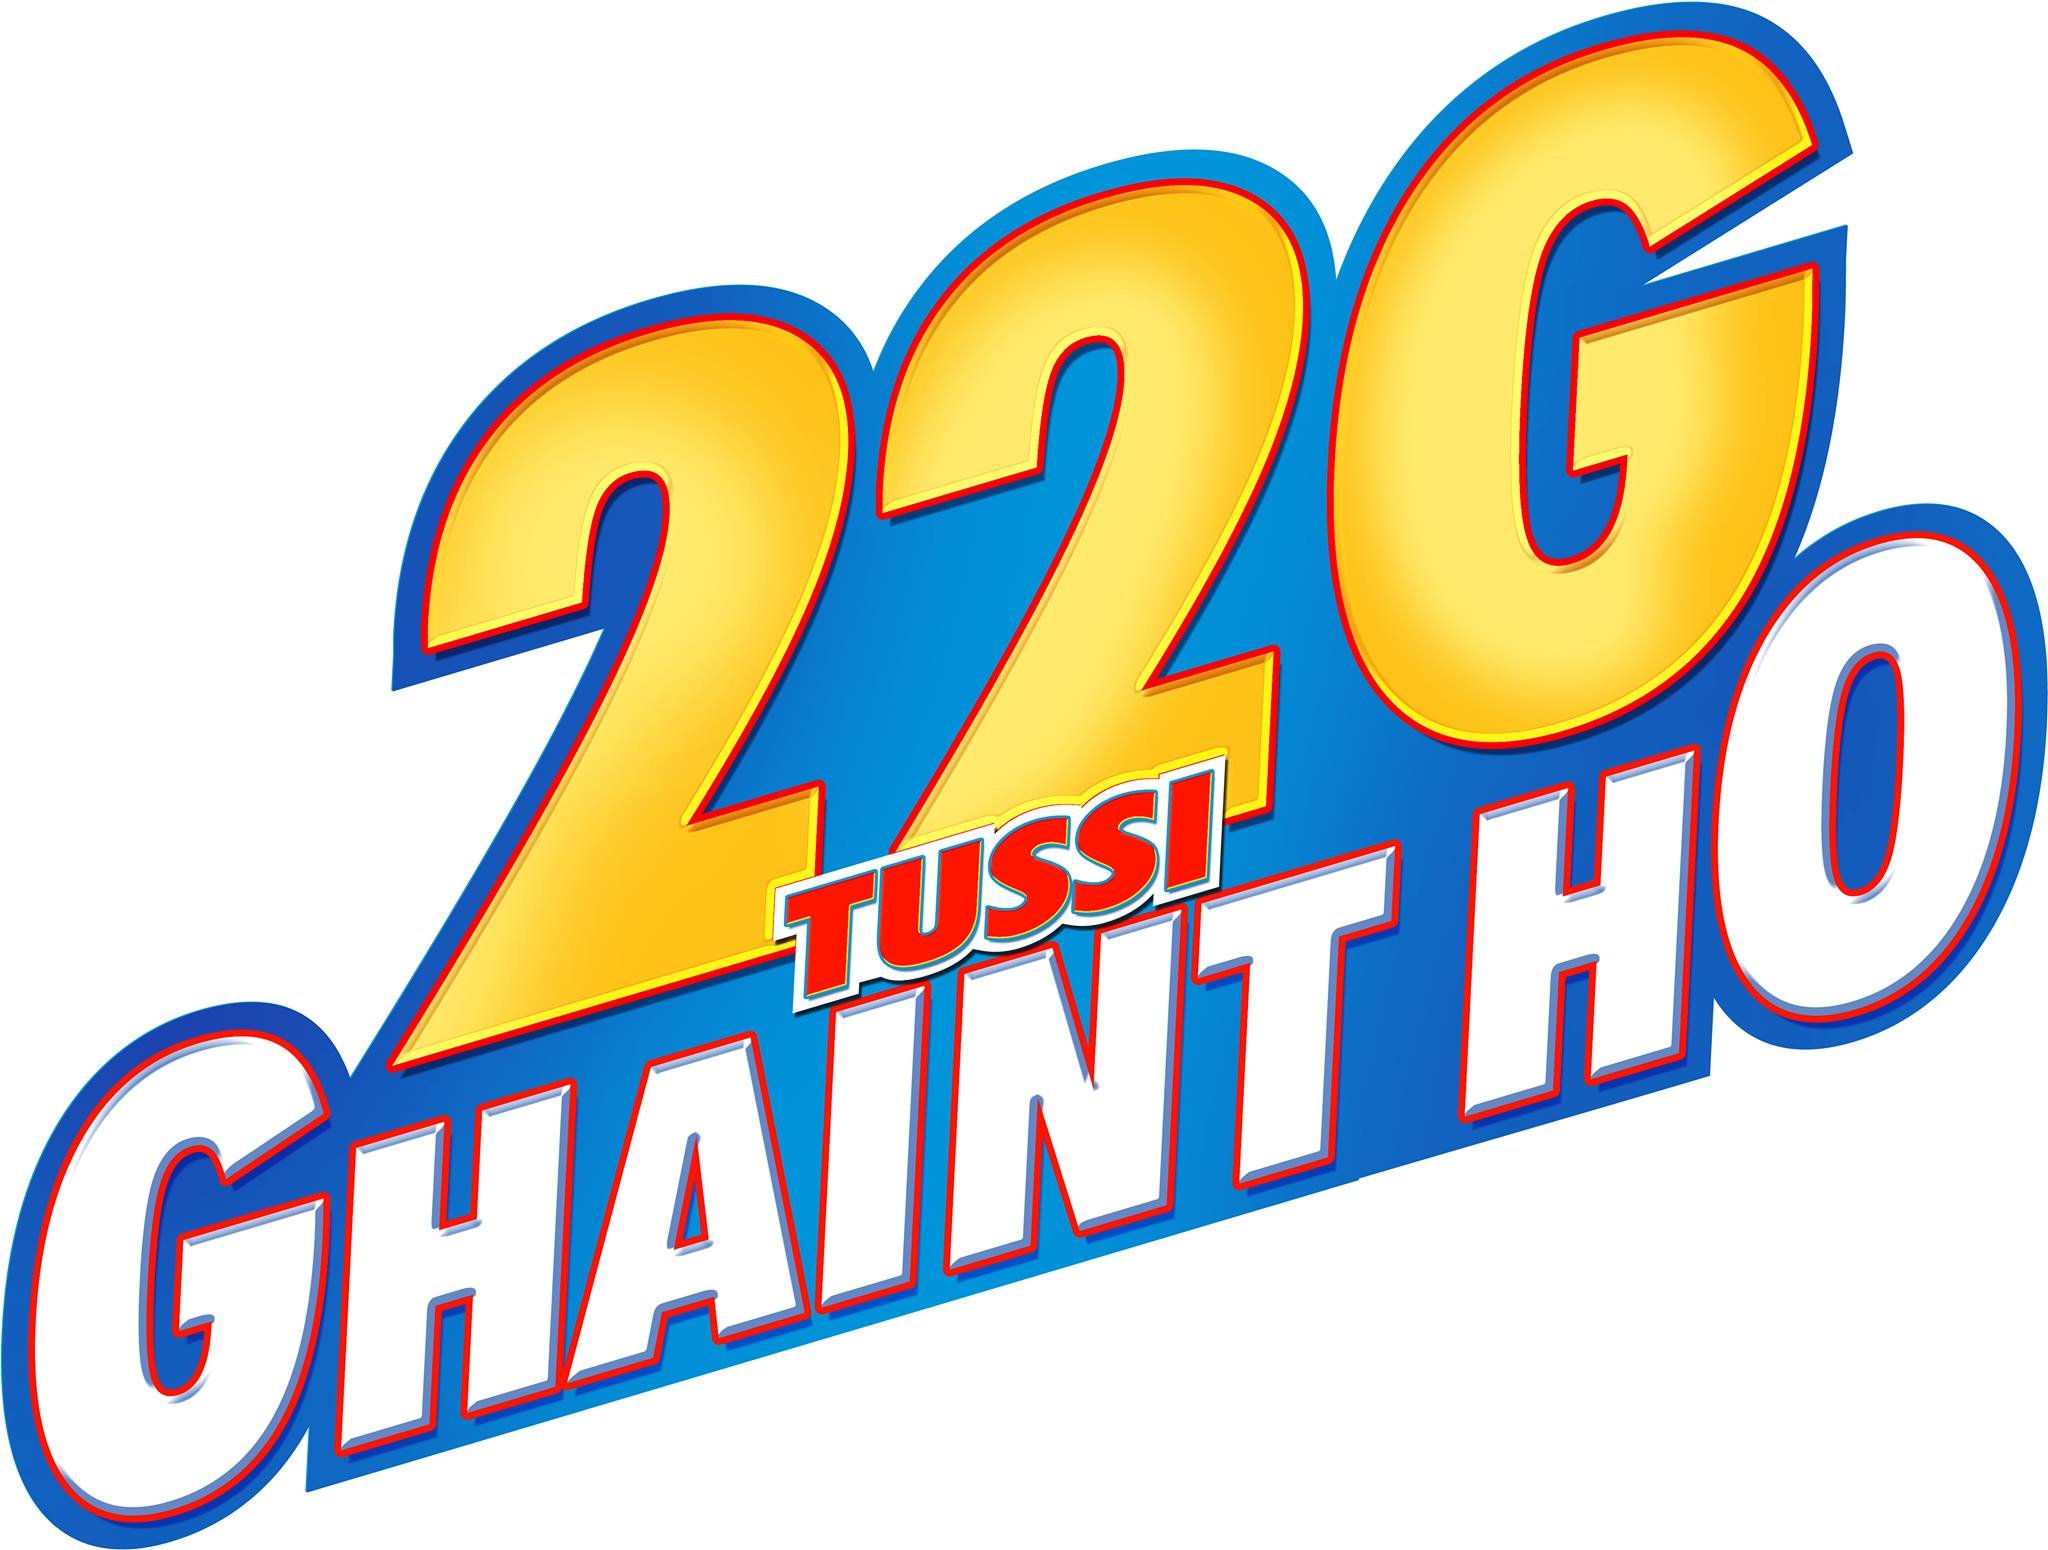 22g Tussi Ghaint Ho Movie Poster